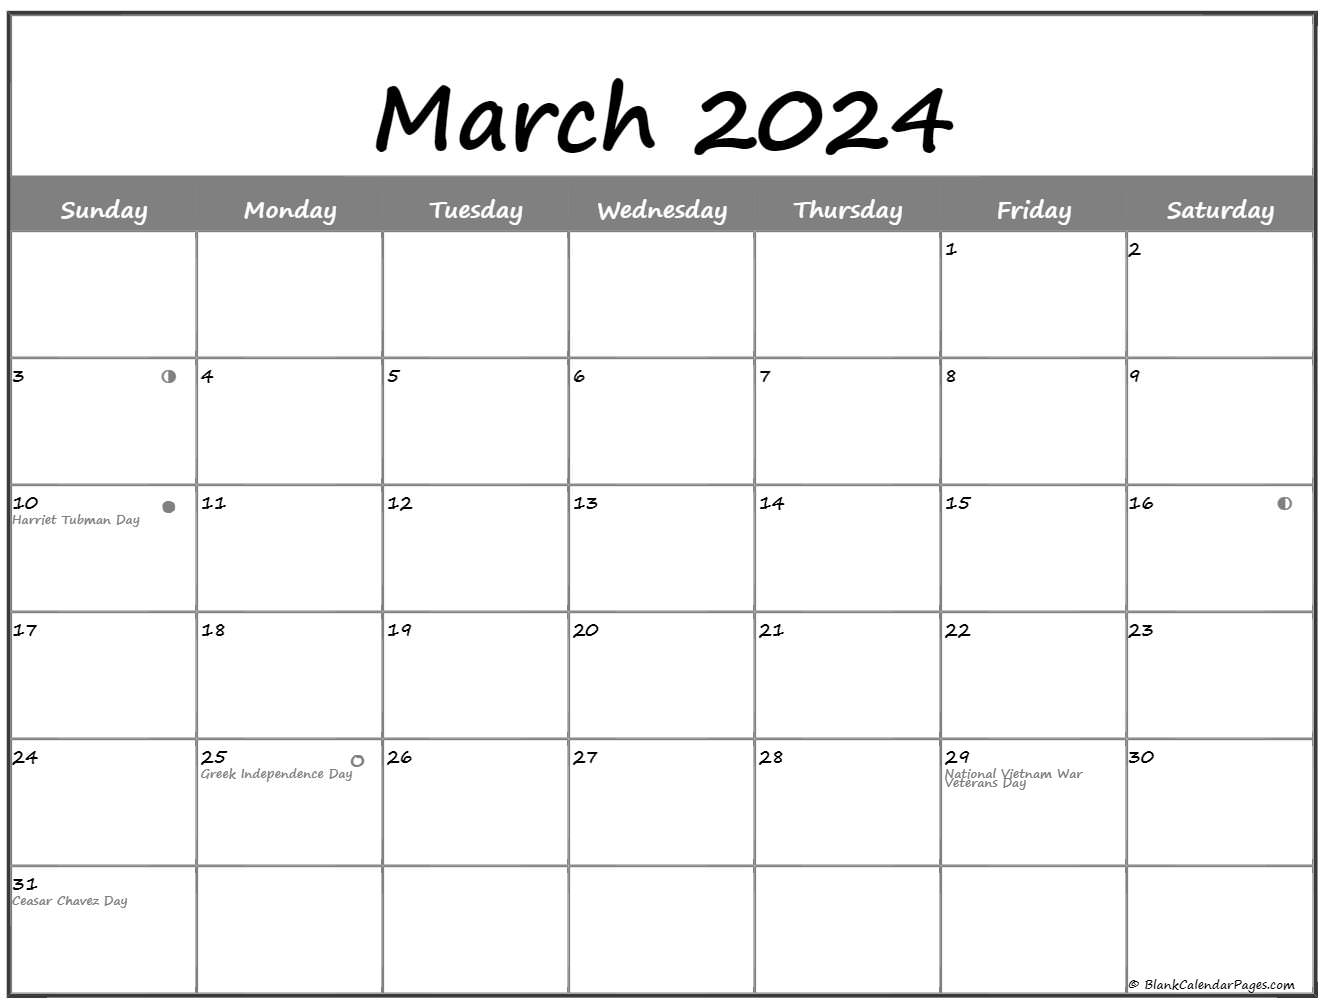 2024 Lunar Calendar Dates New The Best Review of January 2024